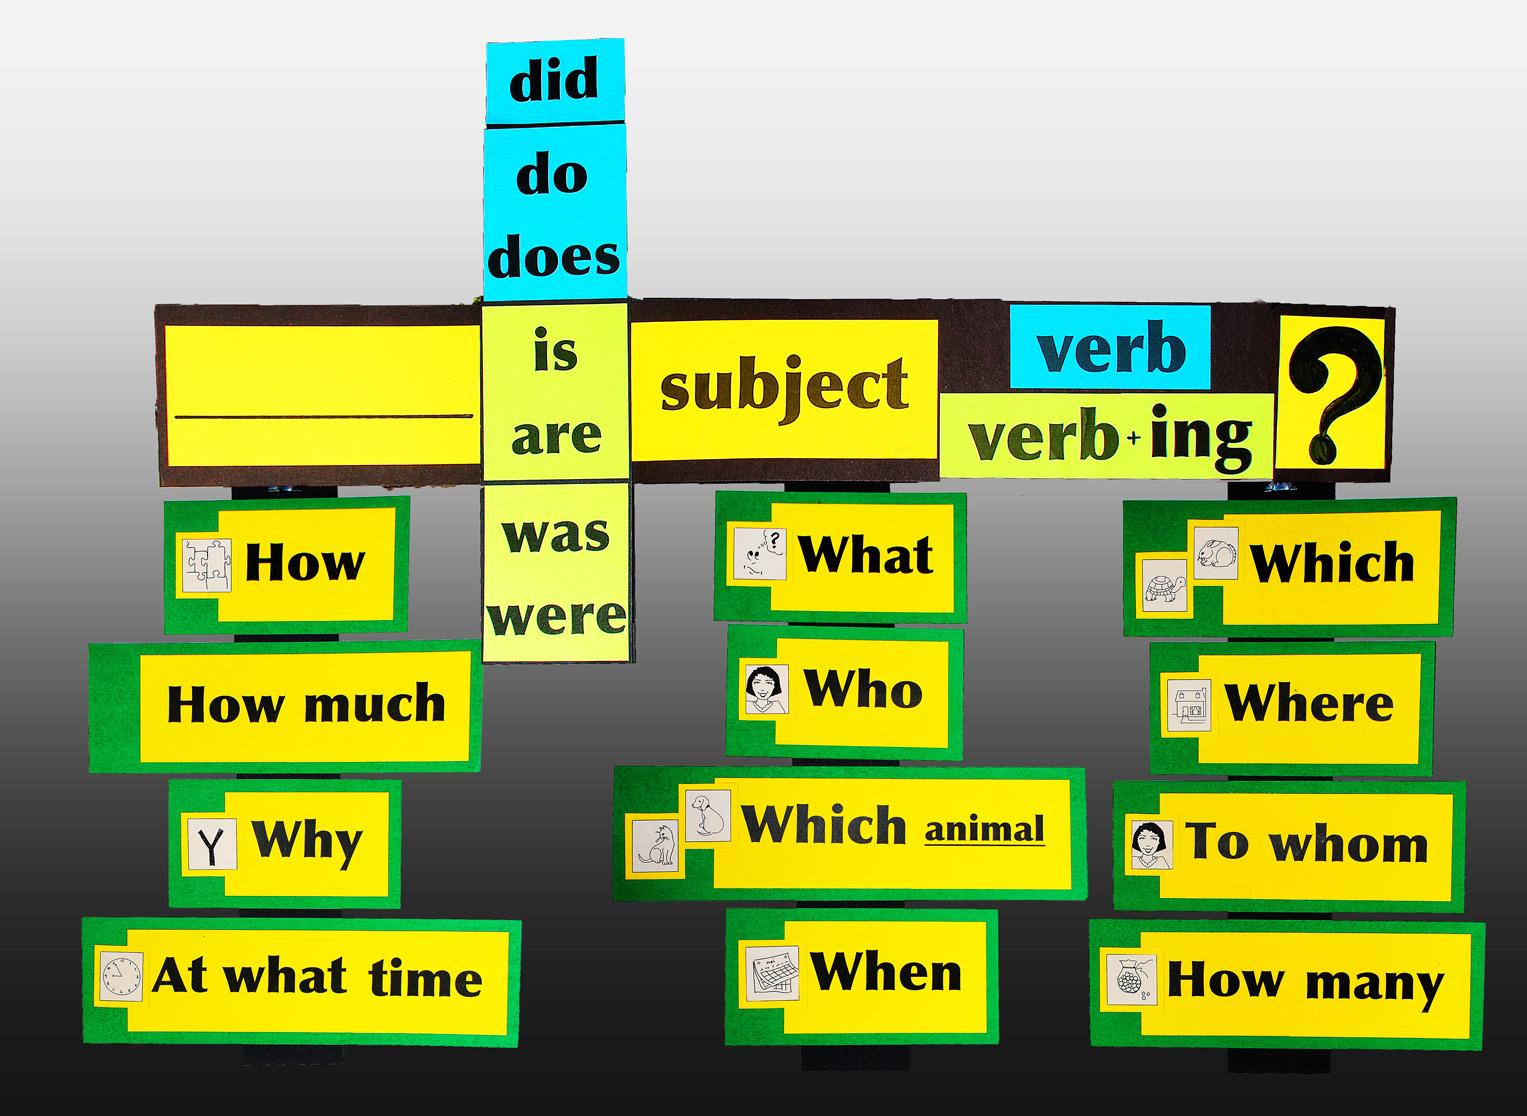 Question structure. WH questions structure. Question structure in English.